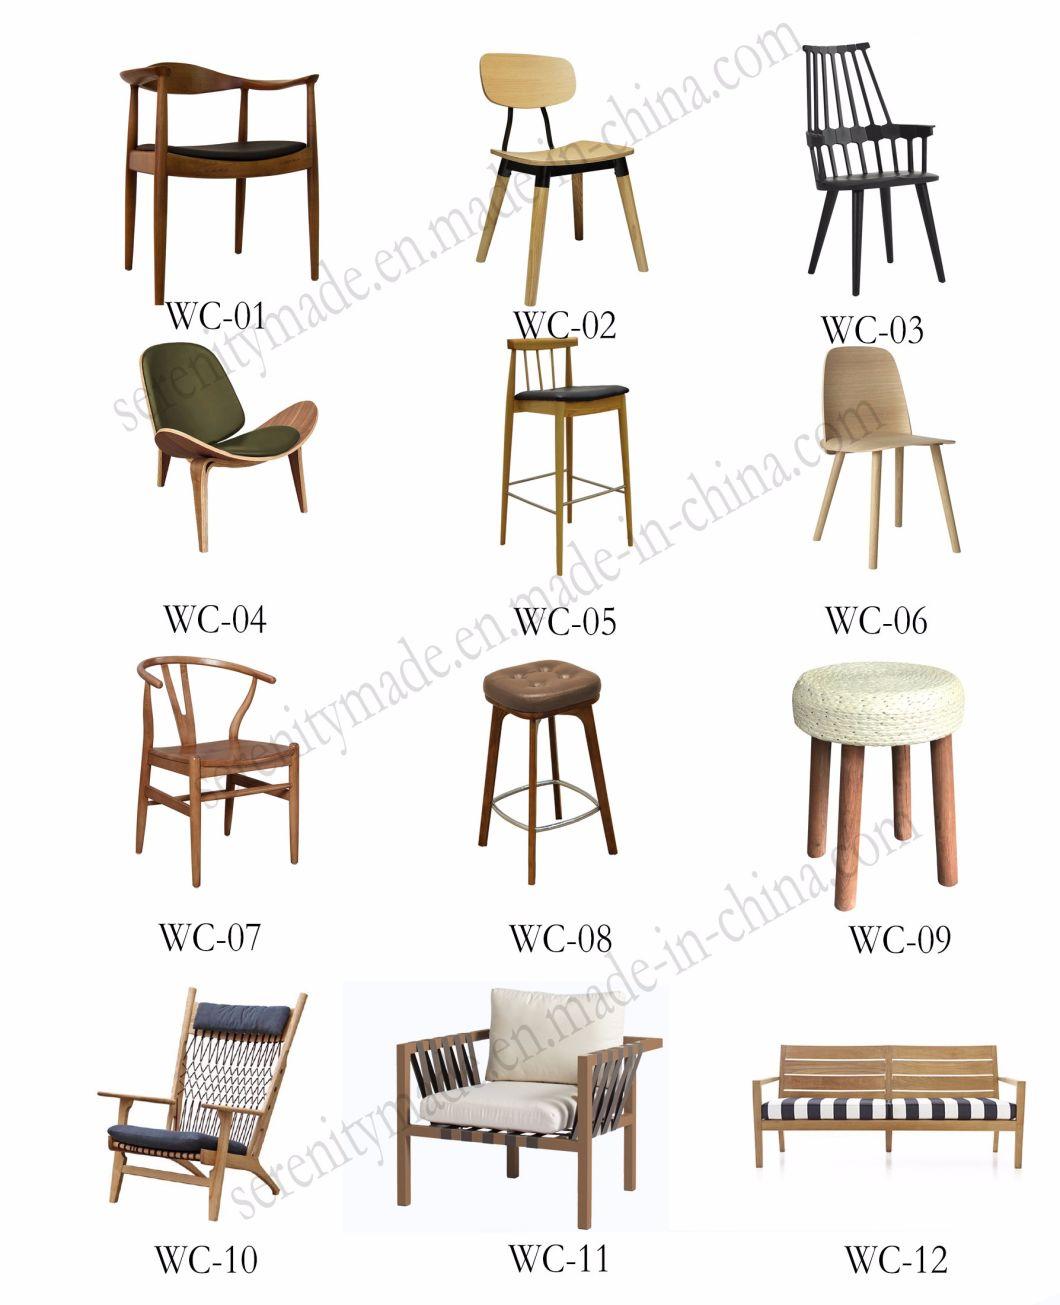 Wholesale Custom-Made Wooden Furniture Supplier Wooden Dining Chair